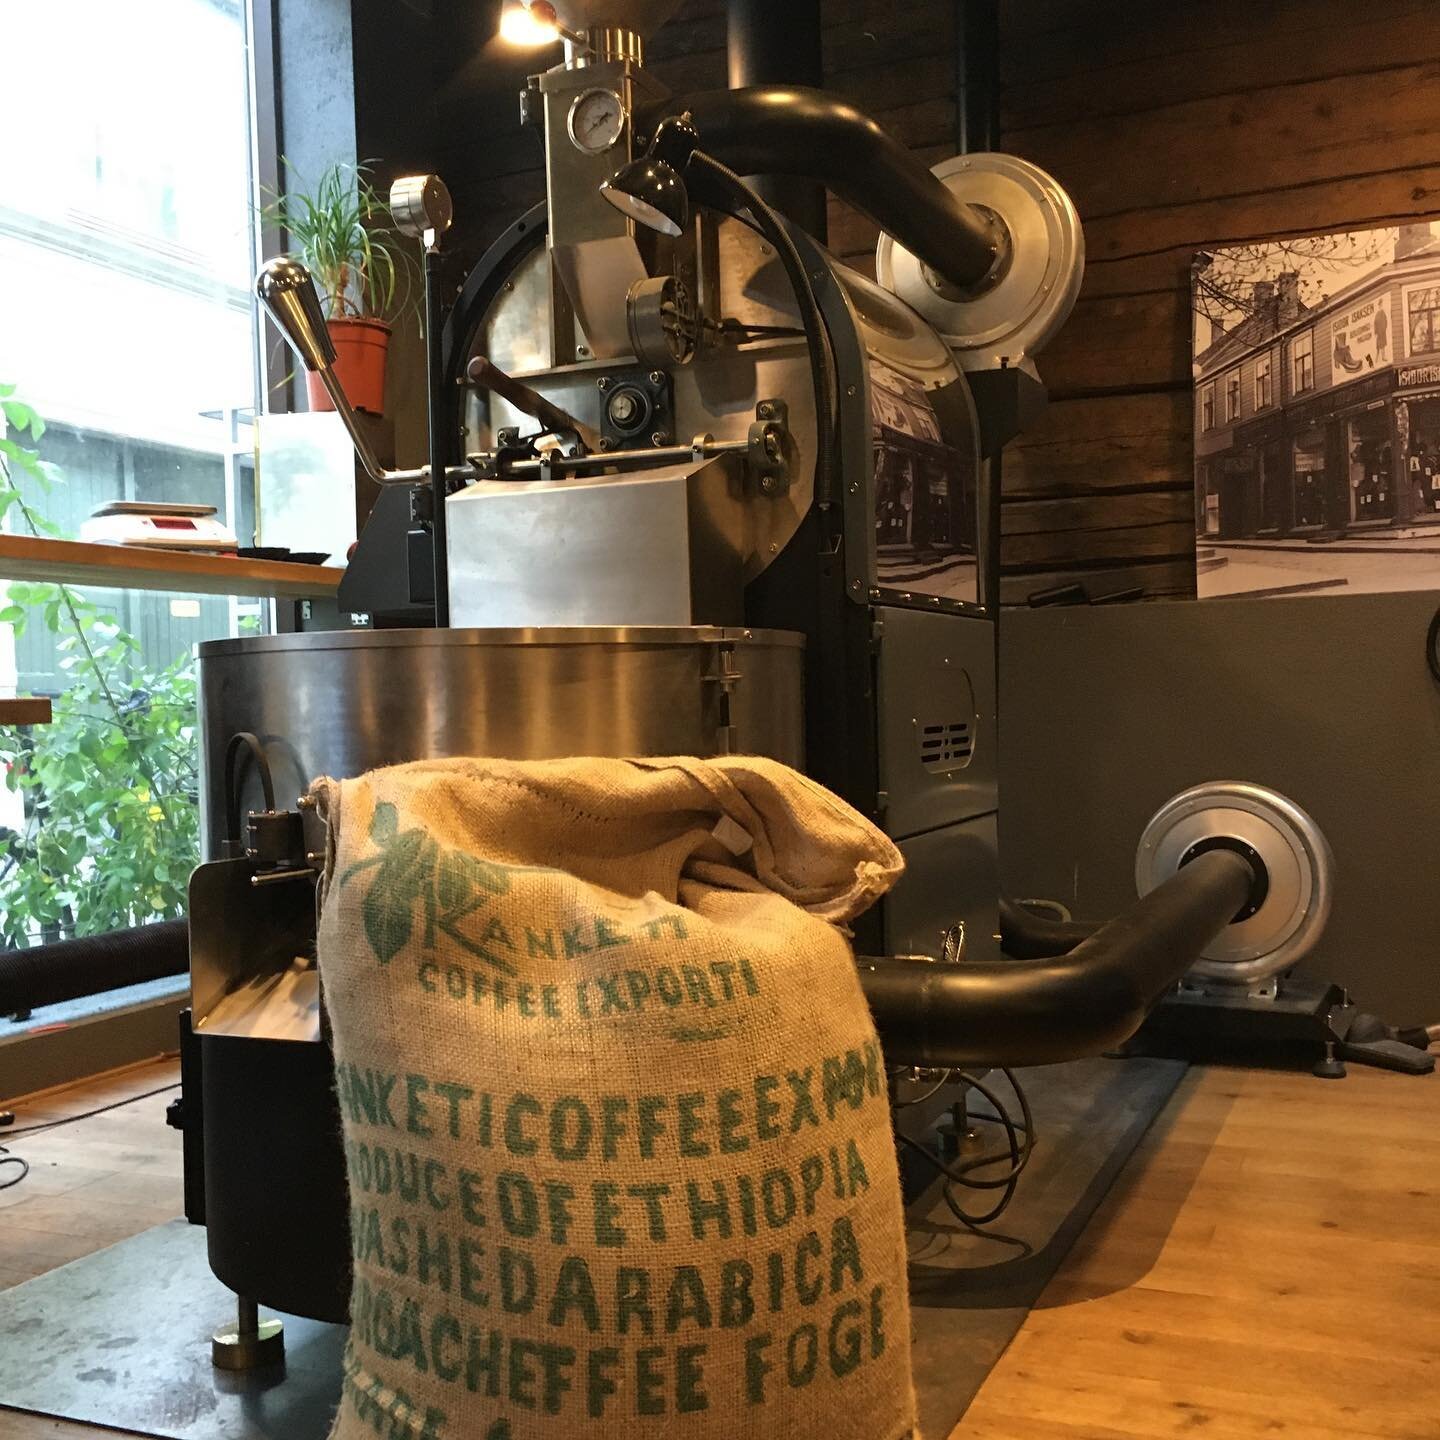 &hellip;.Julekaffe, yes, but we are advocates of calendar should be reading December before releasing it!  This Ethiopian delight is one of our candidates for the &ldquo;Julekaffe&rdquo; label this year. Stay tuned.&hellip; #julekaffe #trondheim #spe